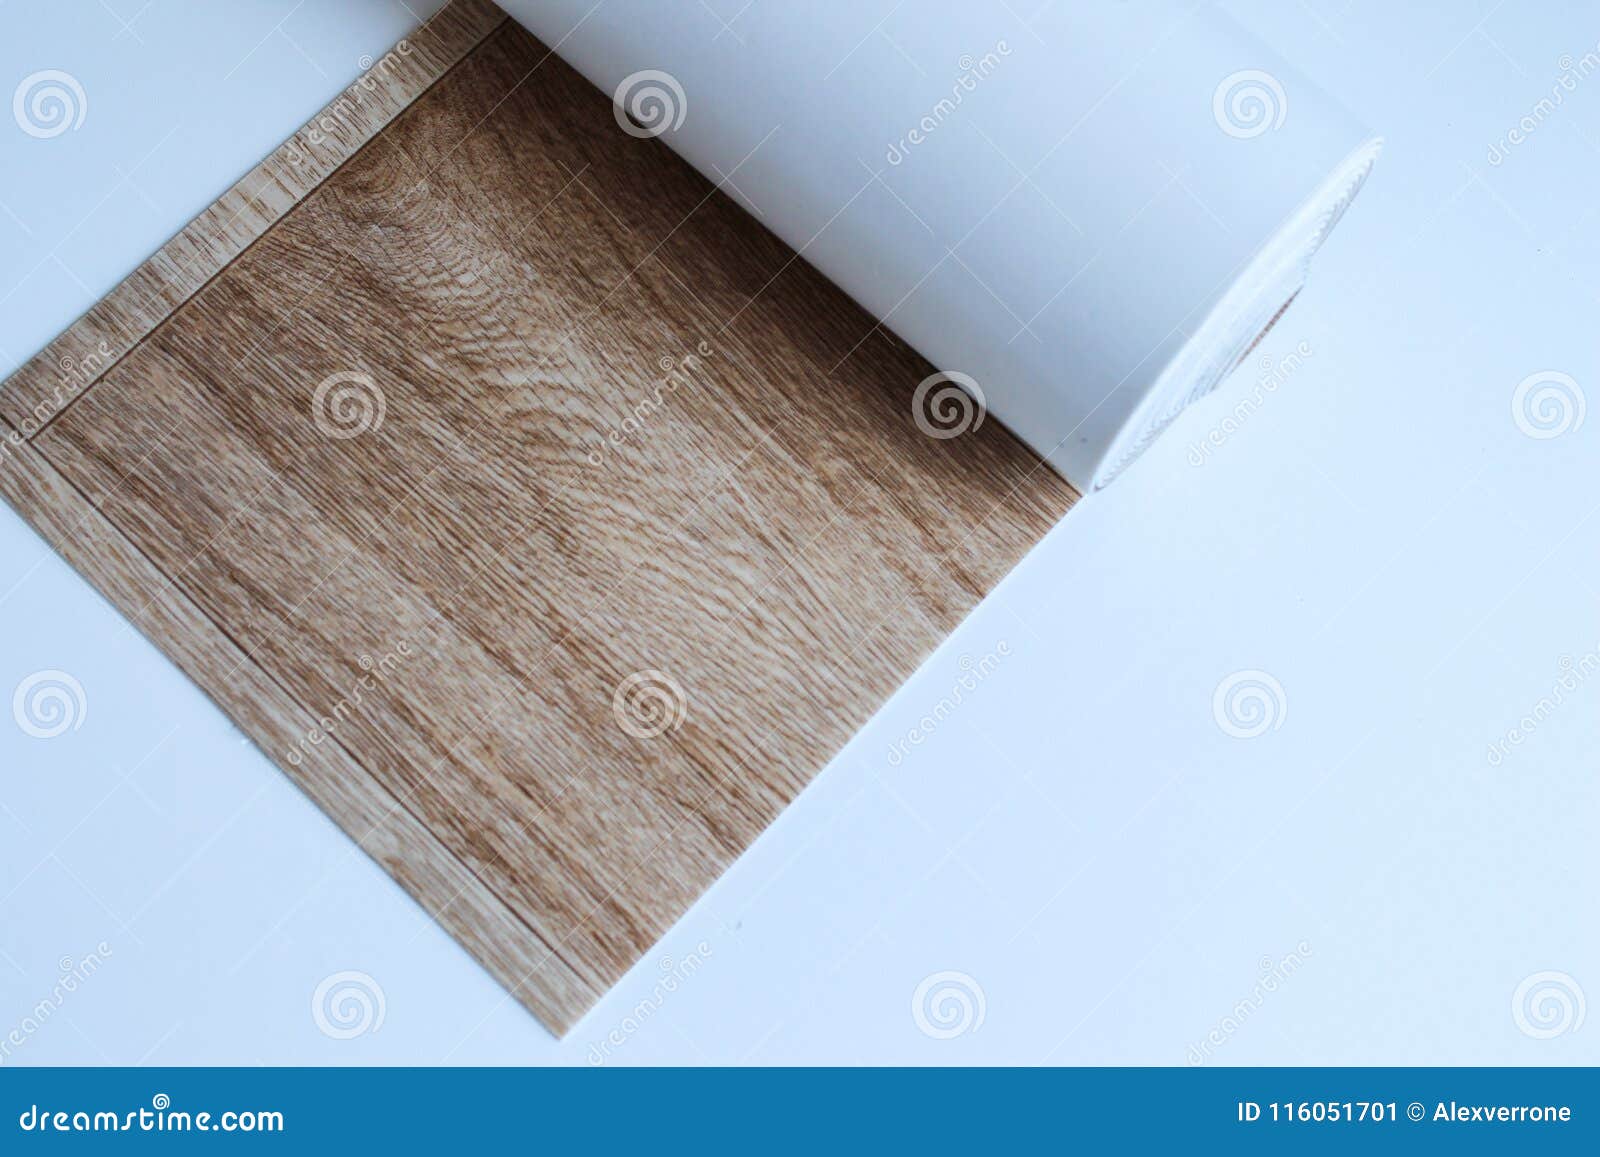 Linoleum on a White Background Stock Image - Image of room, house ...